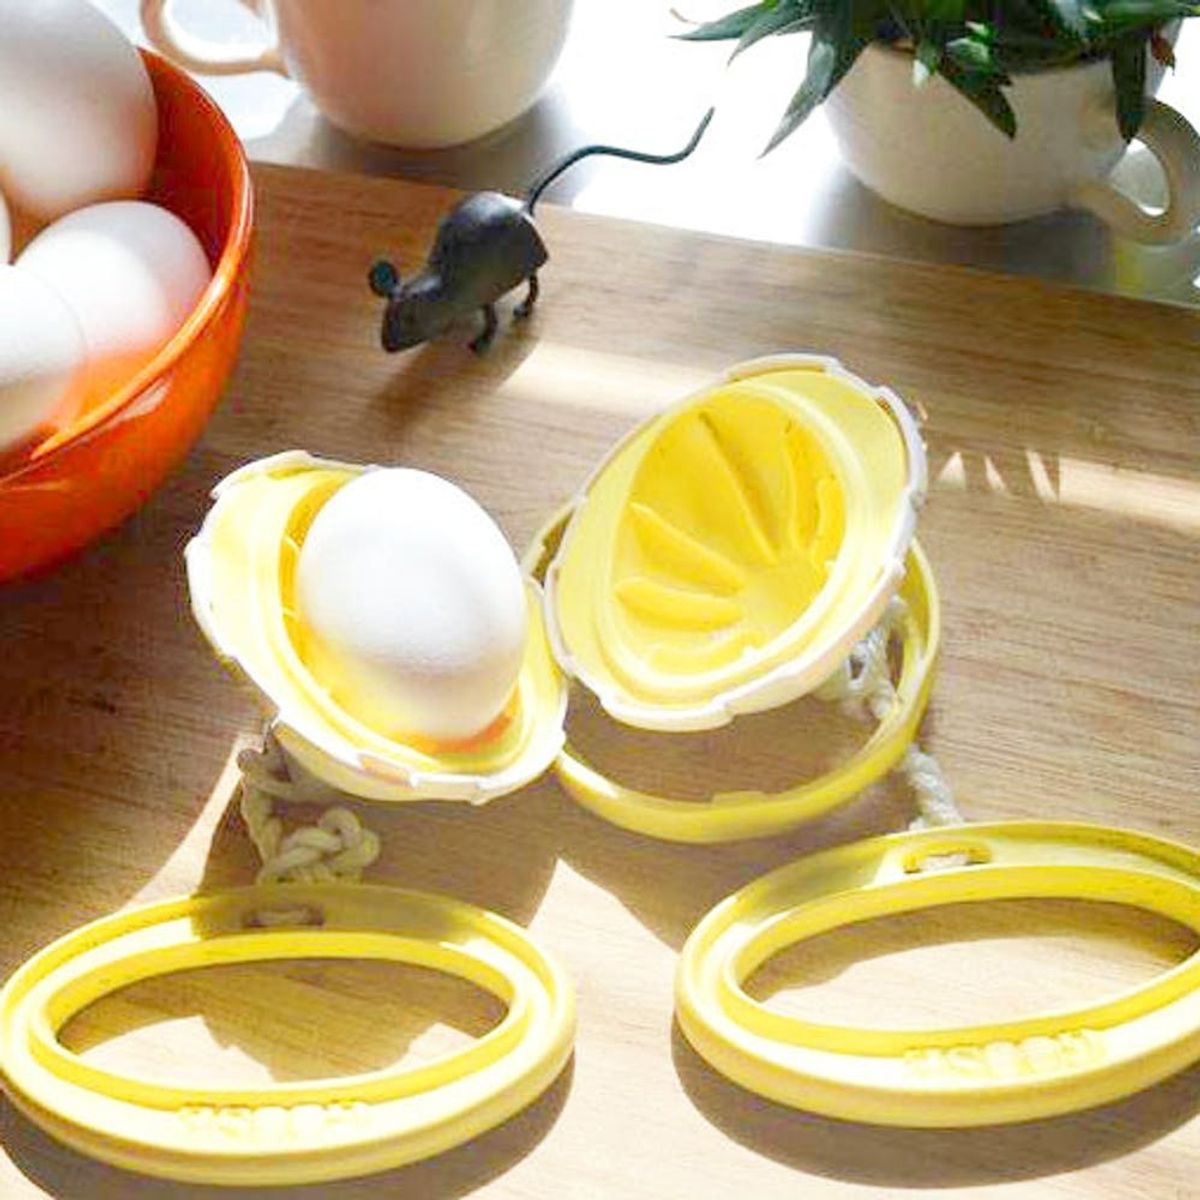 This Is the Craziest Way to Cook Your Eggs